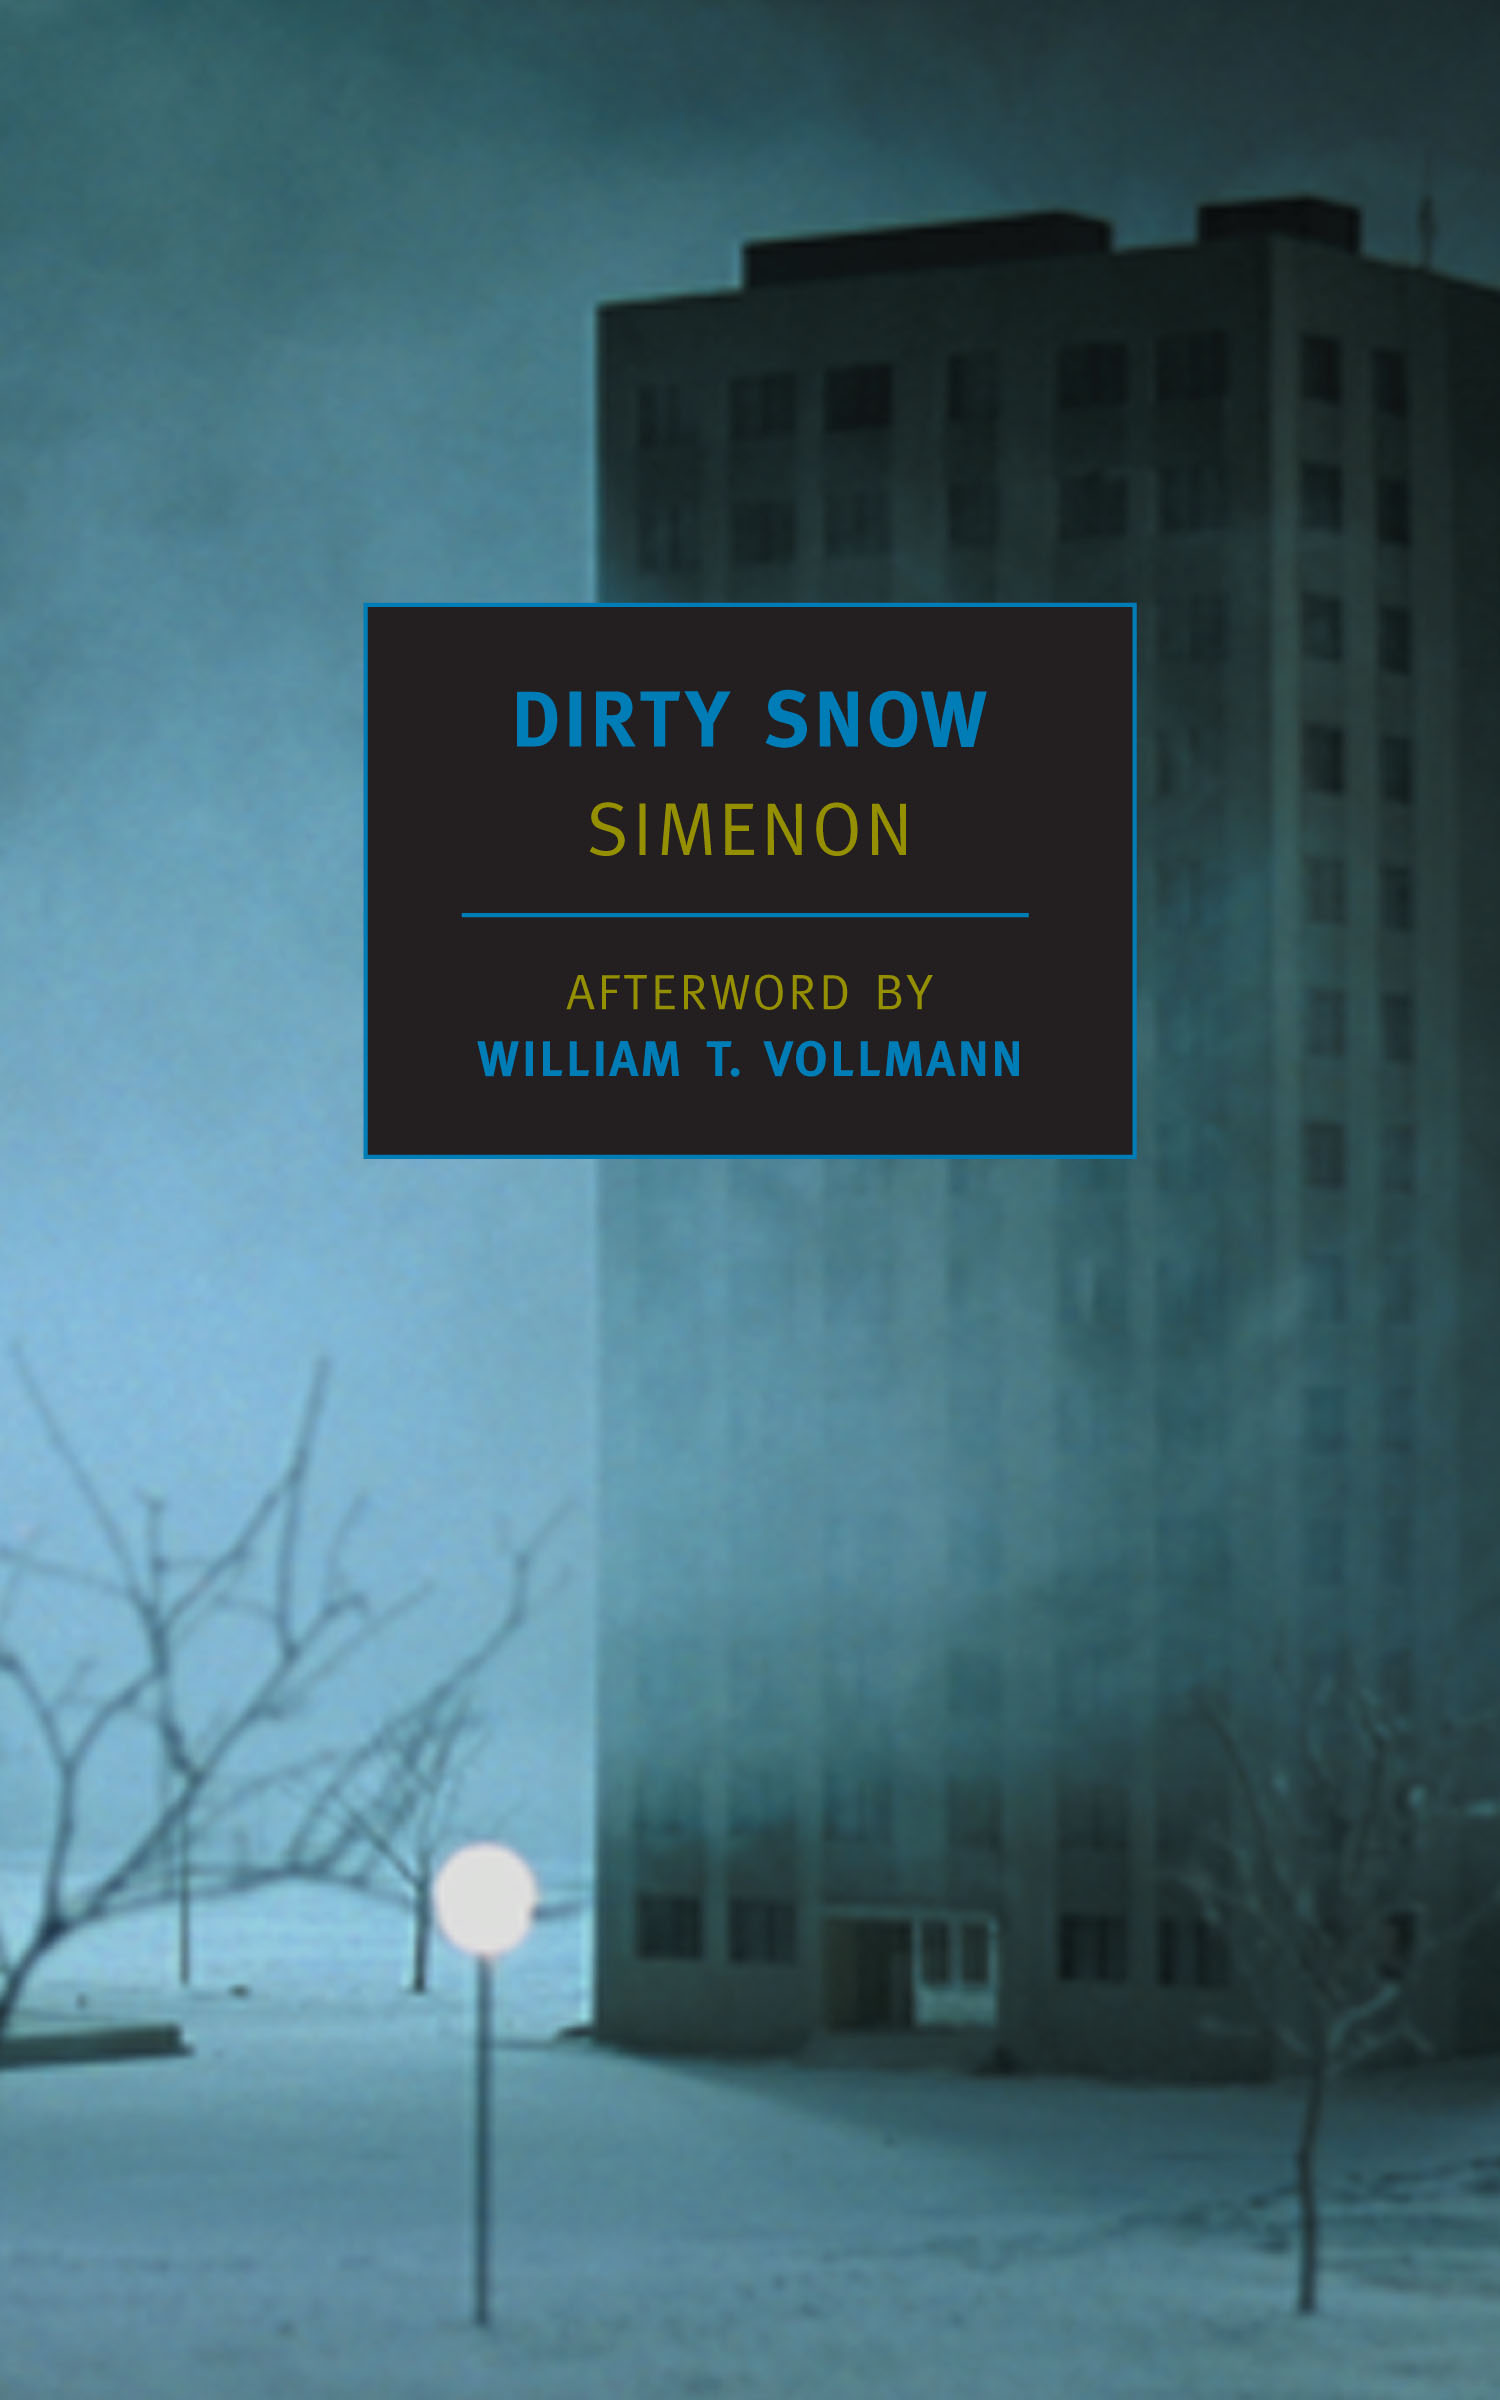 Dirty Snow (2011) by Georges Simenon